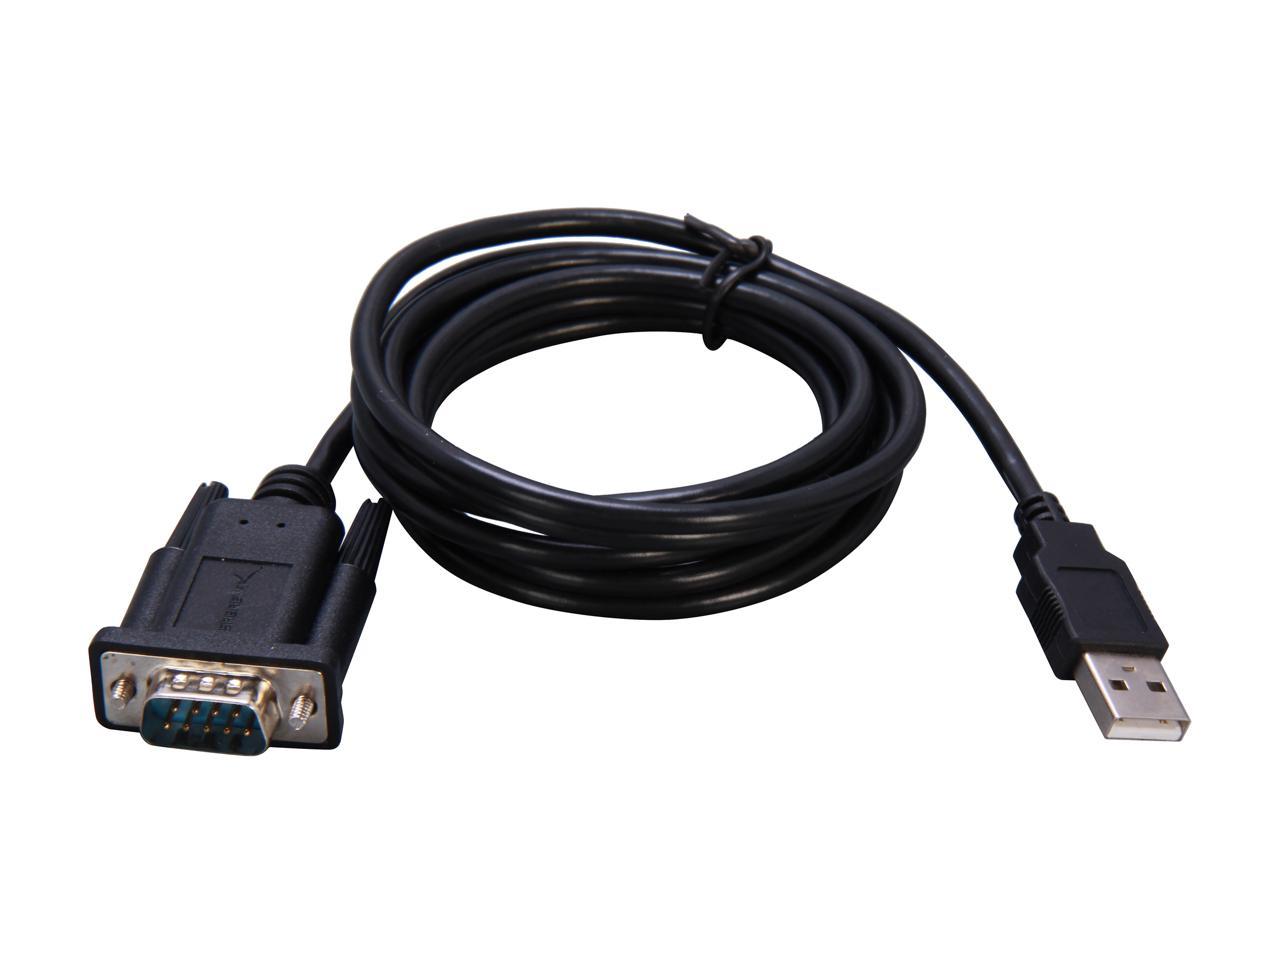 Sabrent Usb 2.0 To Serial Driver